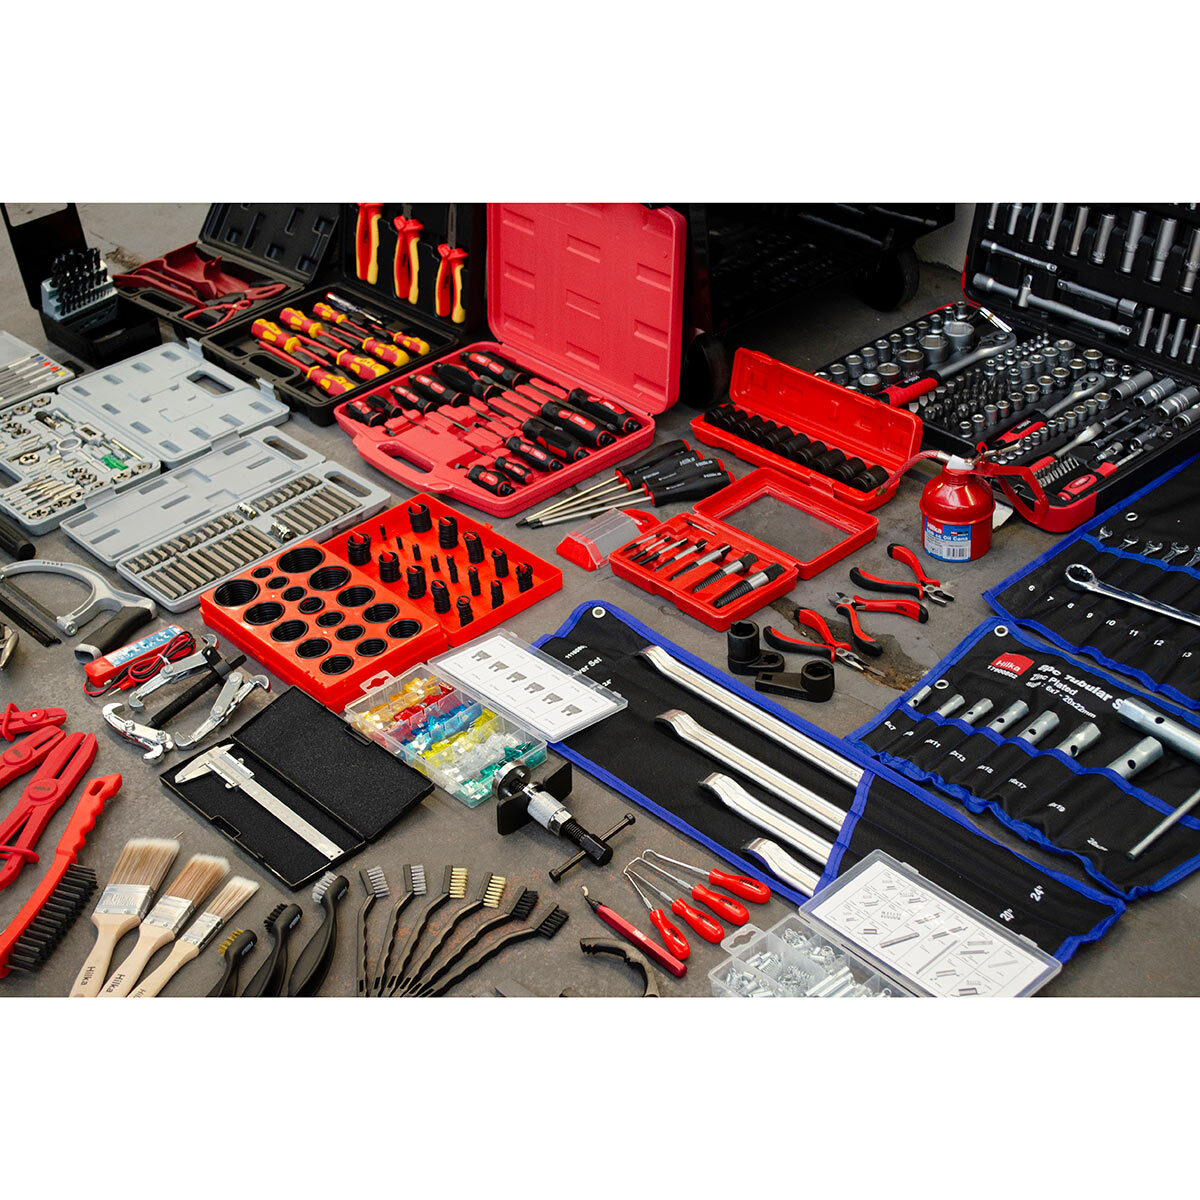 Cut out image of tool chest with included tools